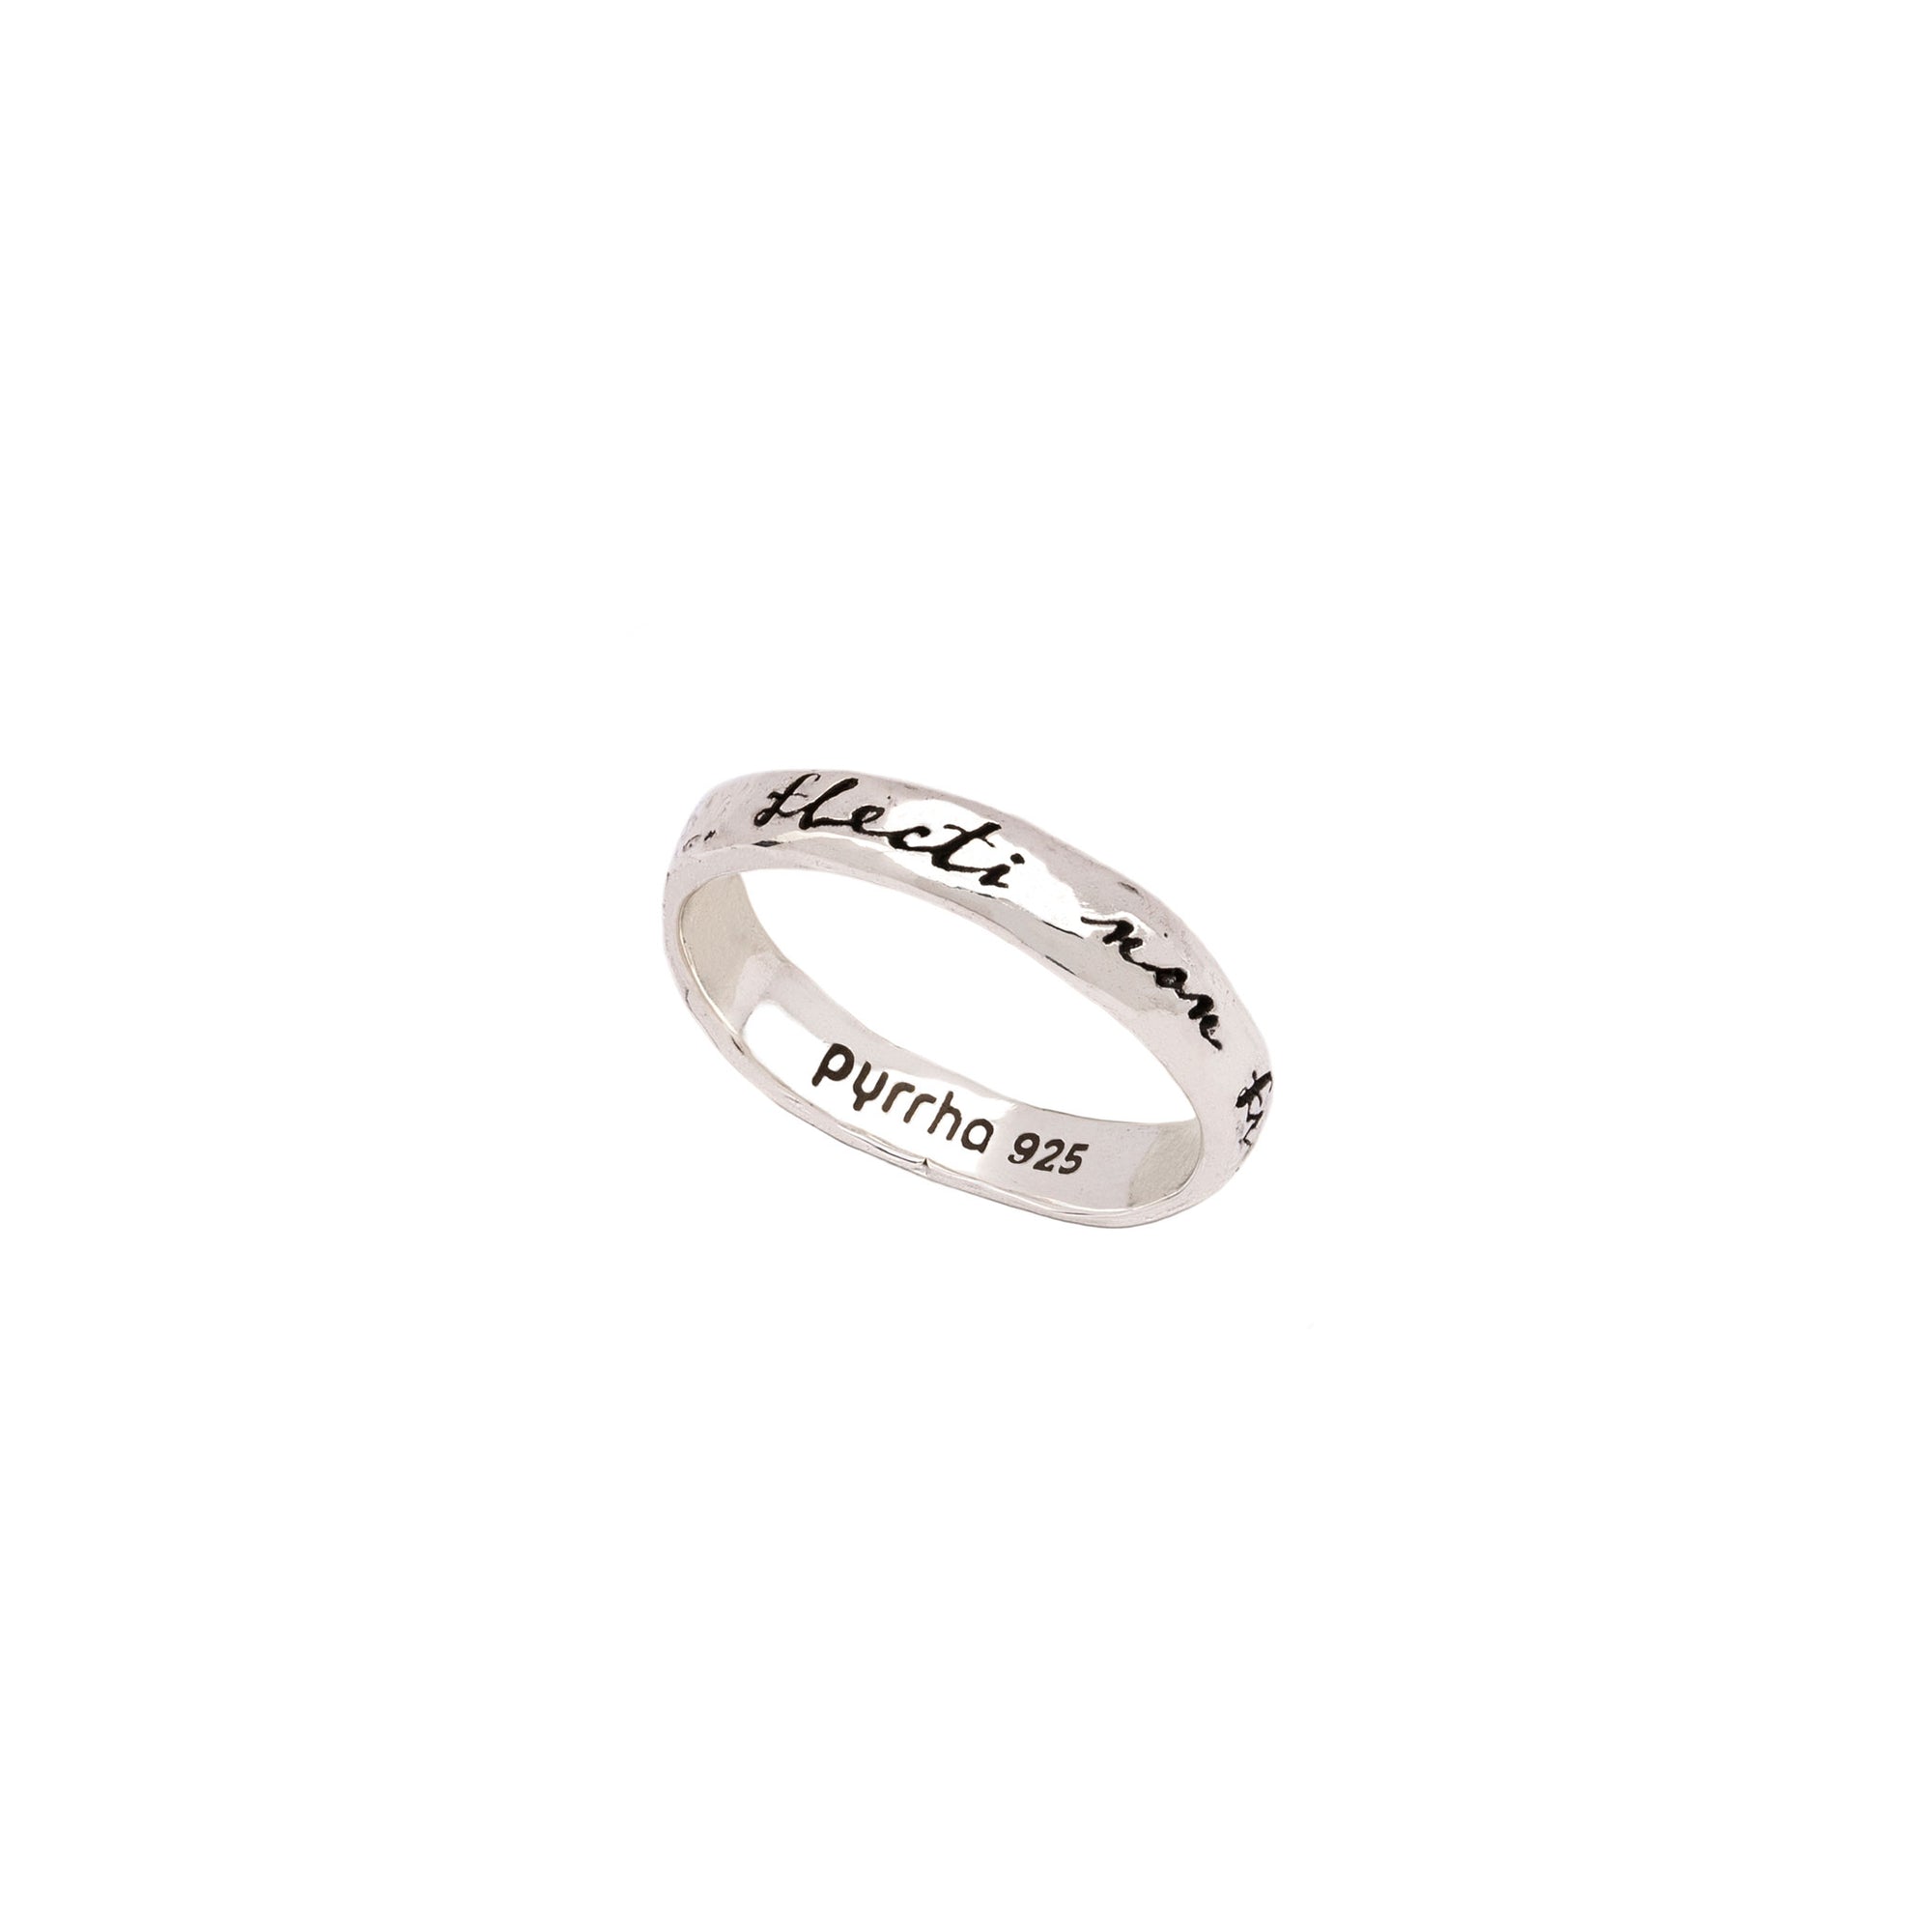 An engraved silver band ring representing those who are to be bent not broken